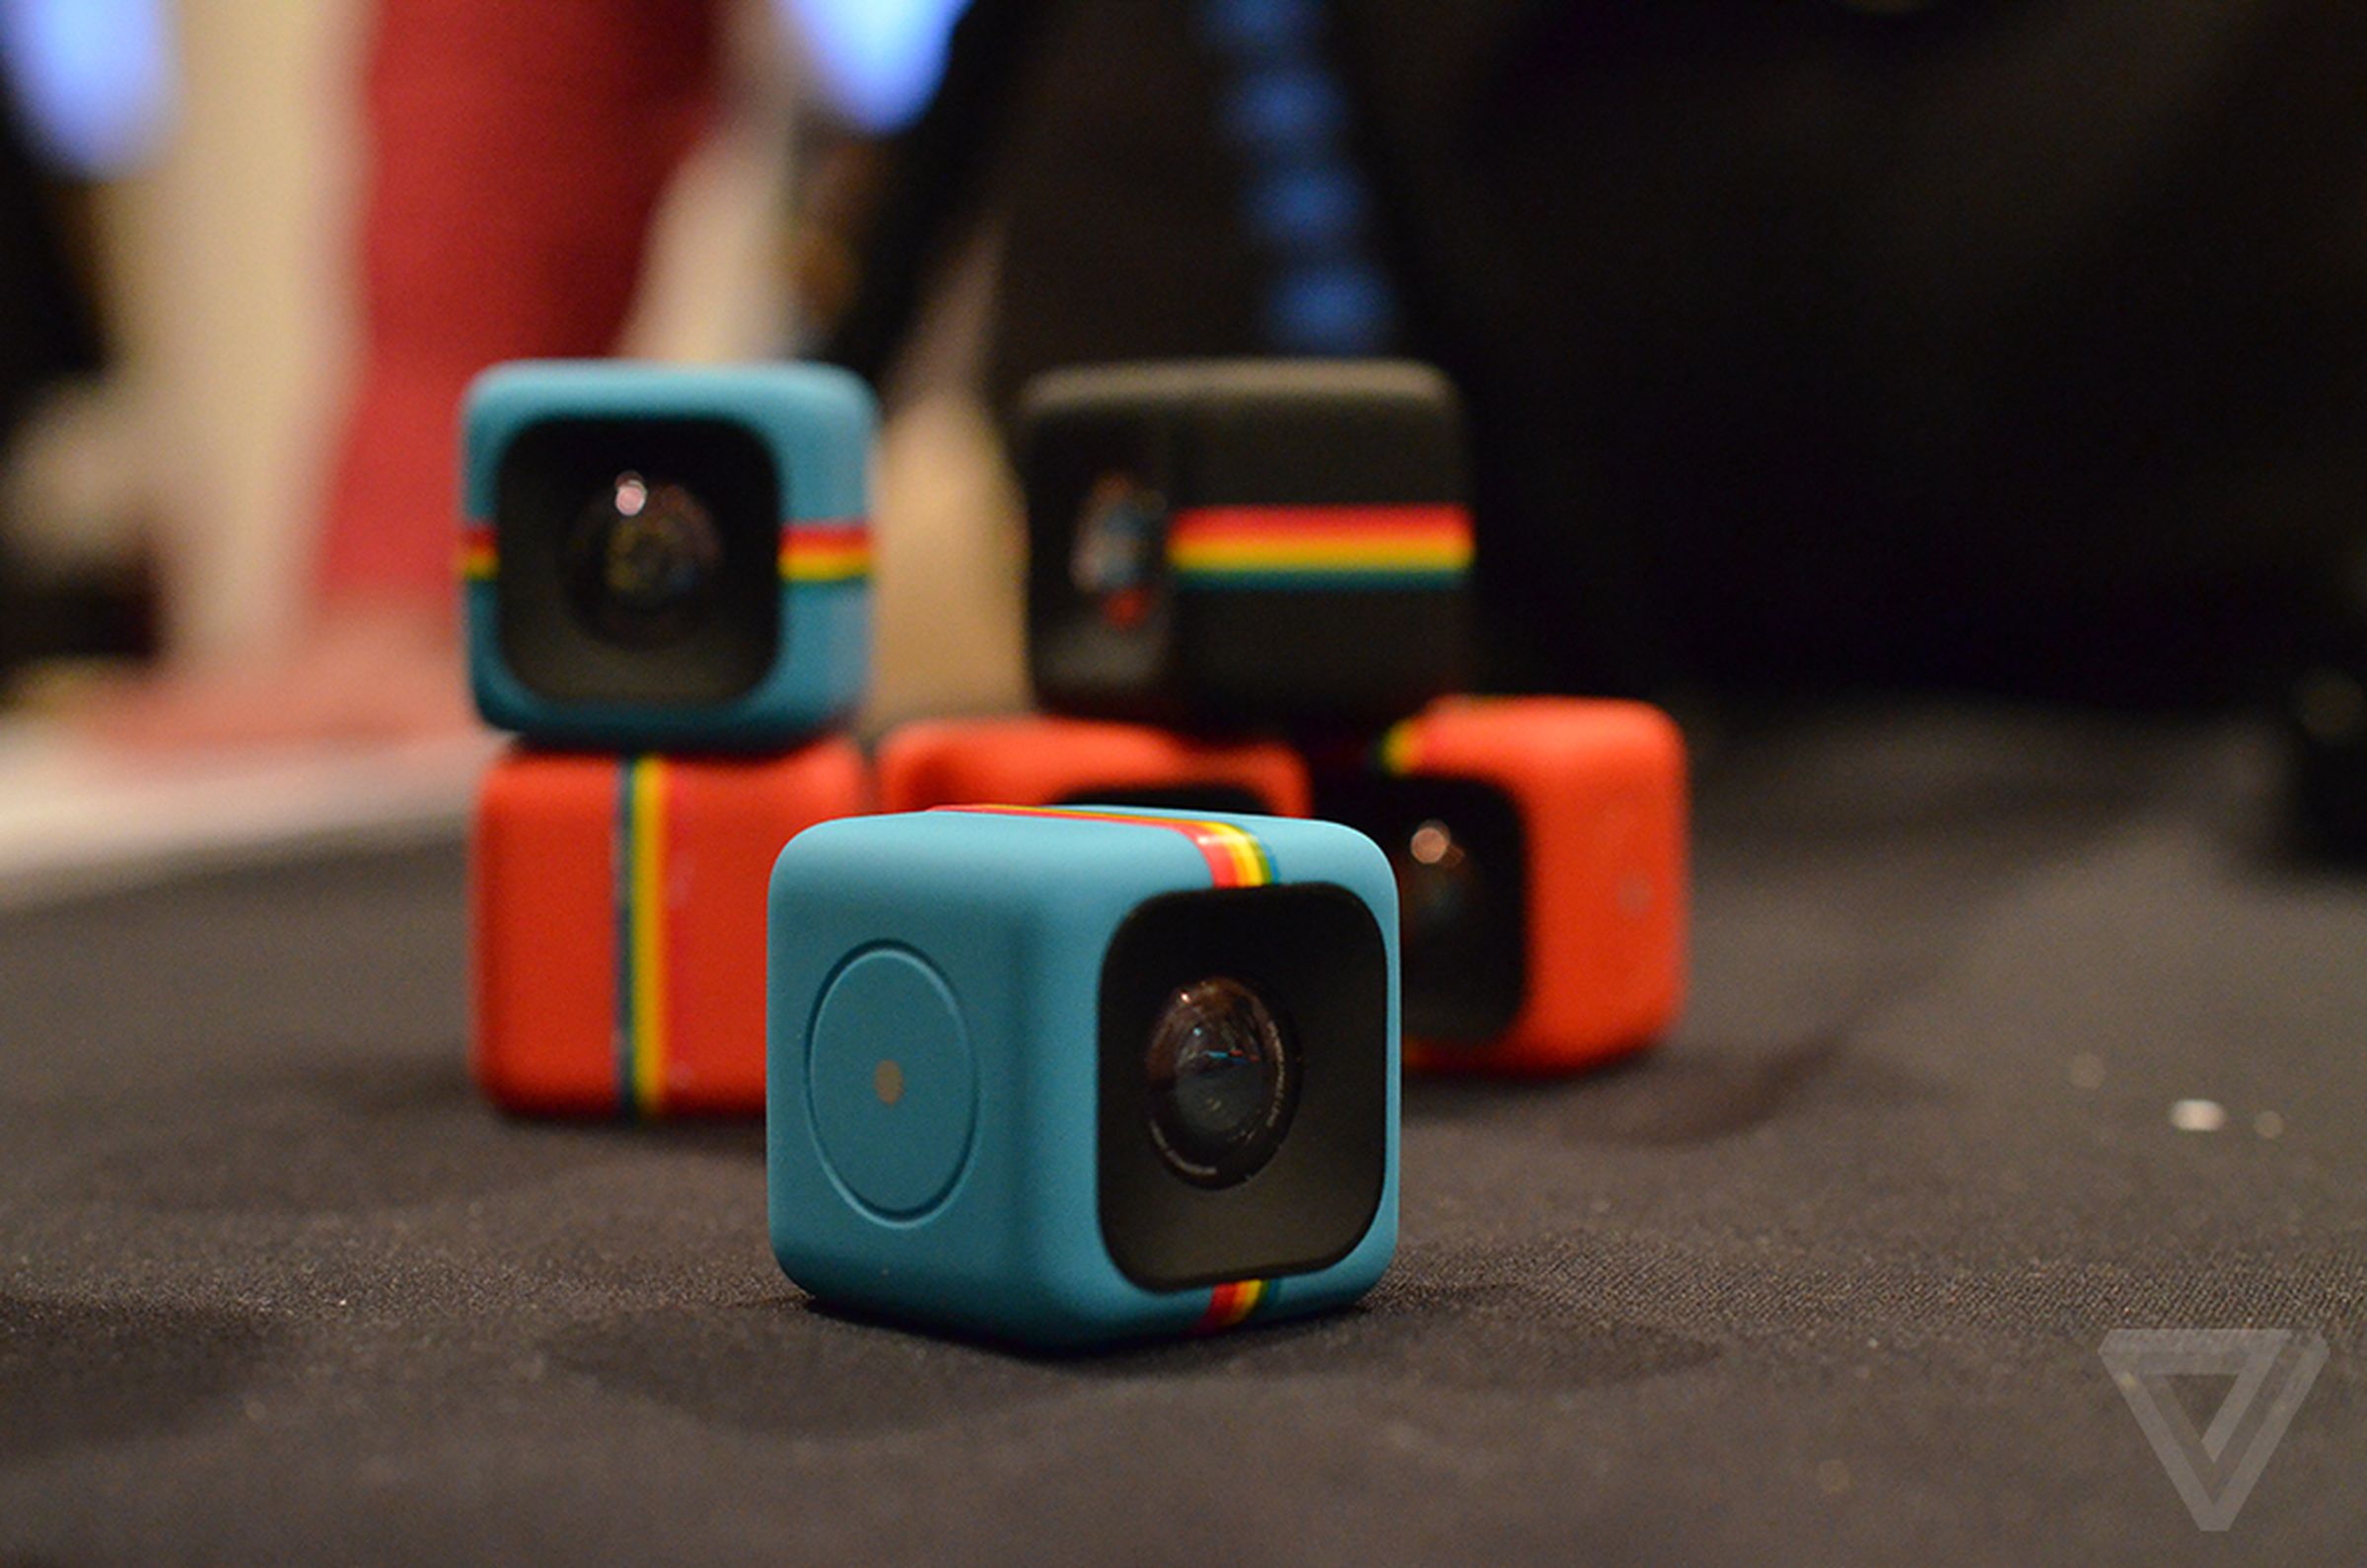 Polaroid C3 Action Sports video camera hands-on images